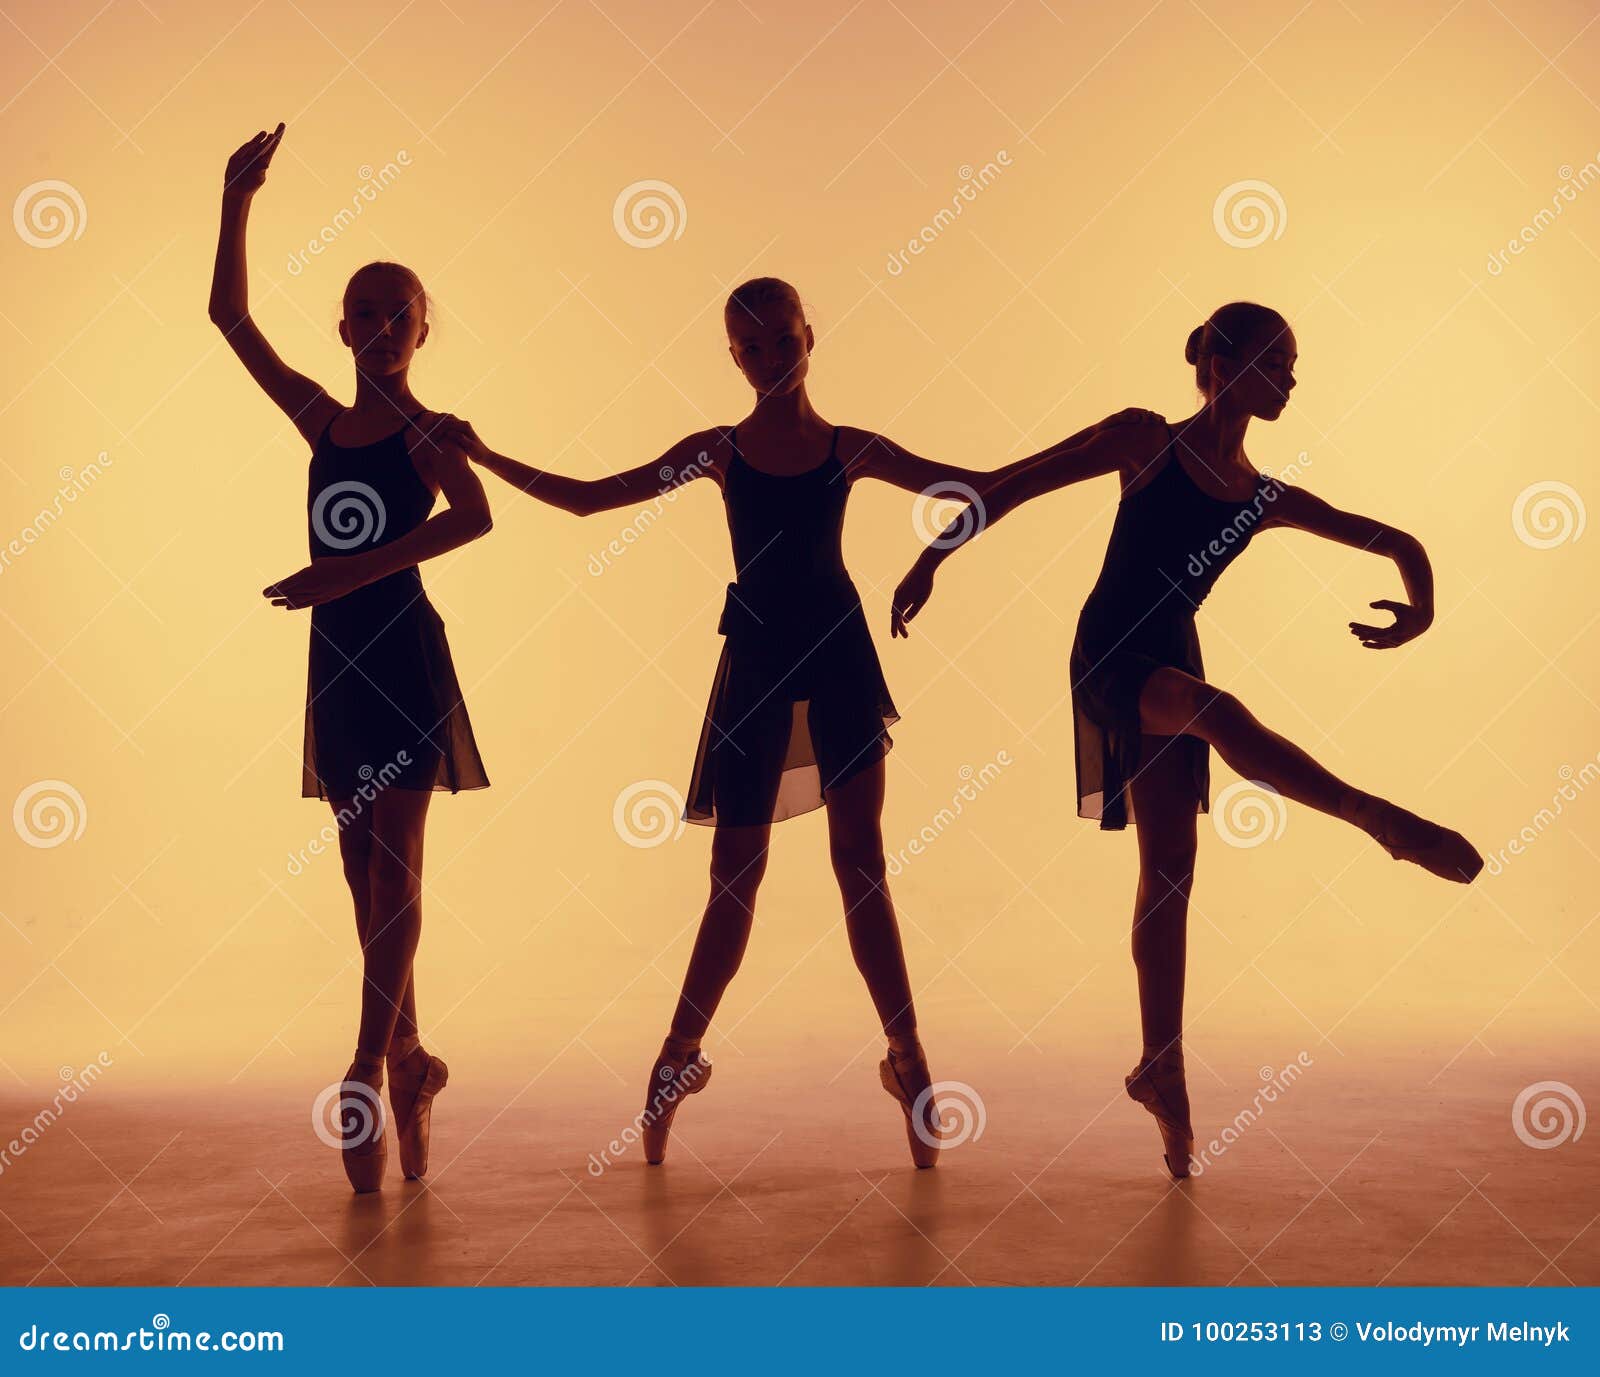 Male Ballet Dancer Clipart Vector, Illustration Pattern Of Ballet Dancers  Couple A Man In Different Poses, Colorful Design, Template, Cute PNG Image  For Free Download